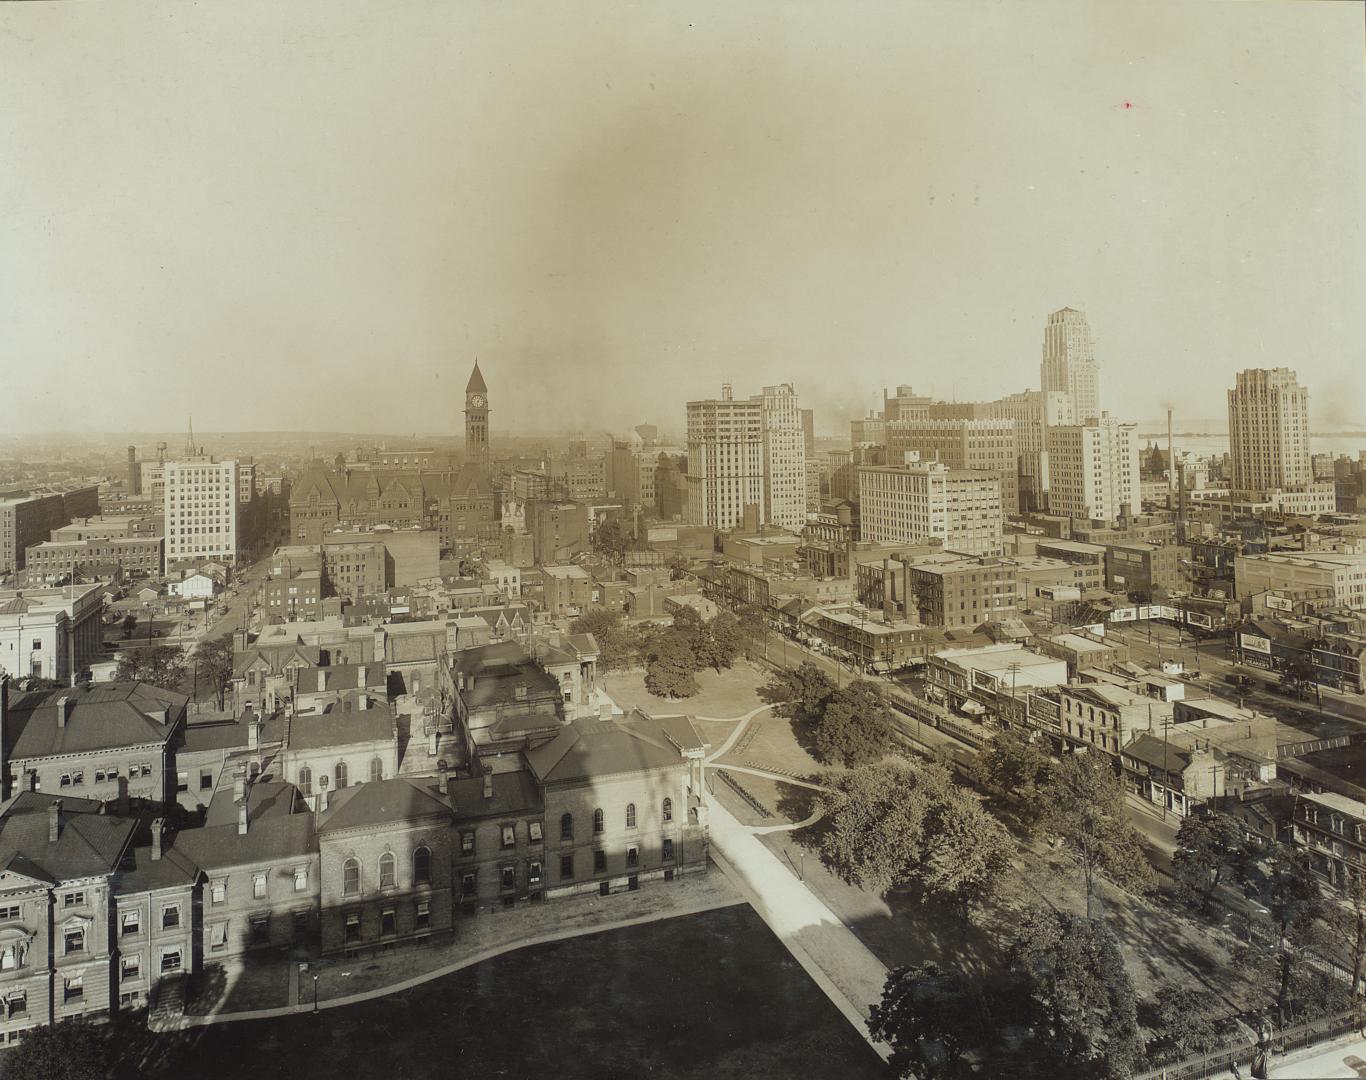 Toronto Downtown 1930, Looking east from University Avenue, north of Queen Street West